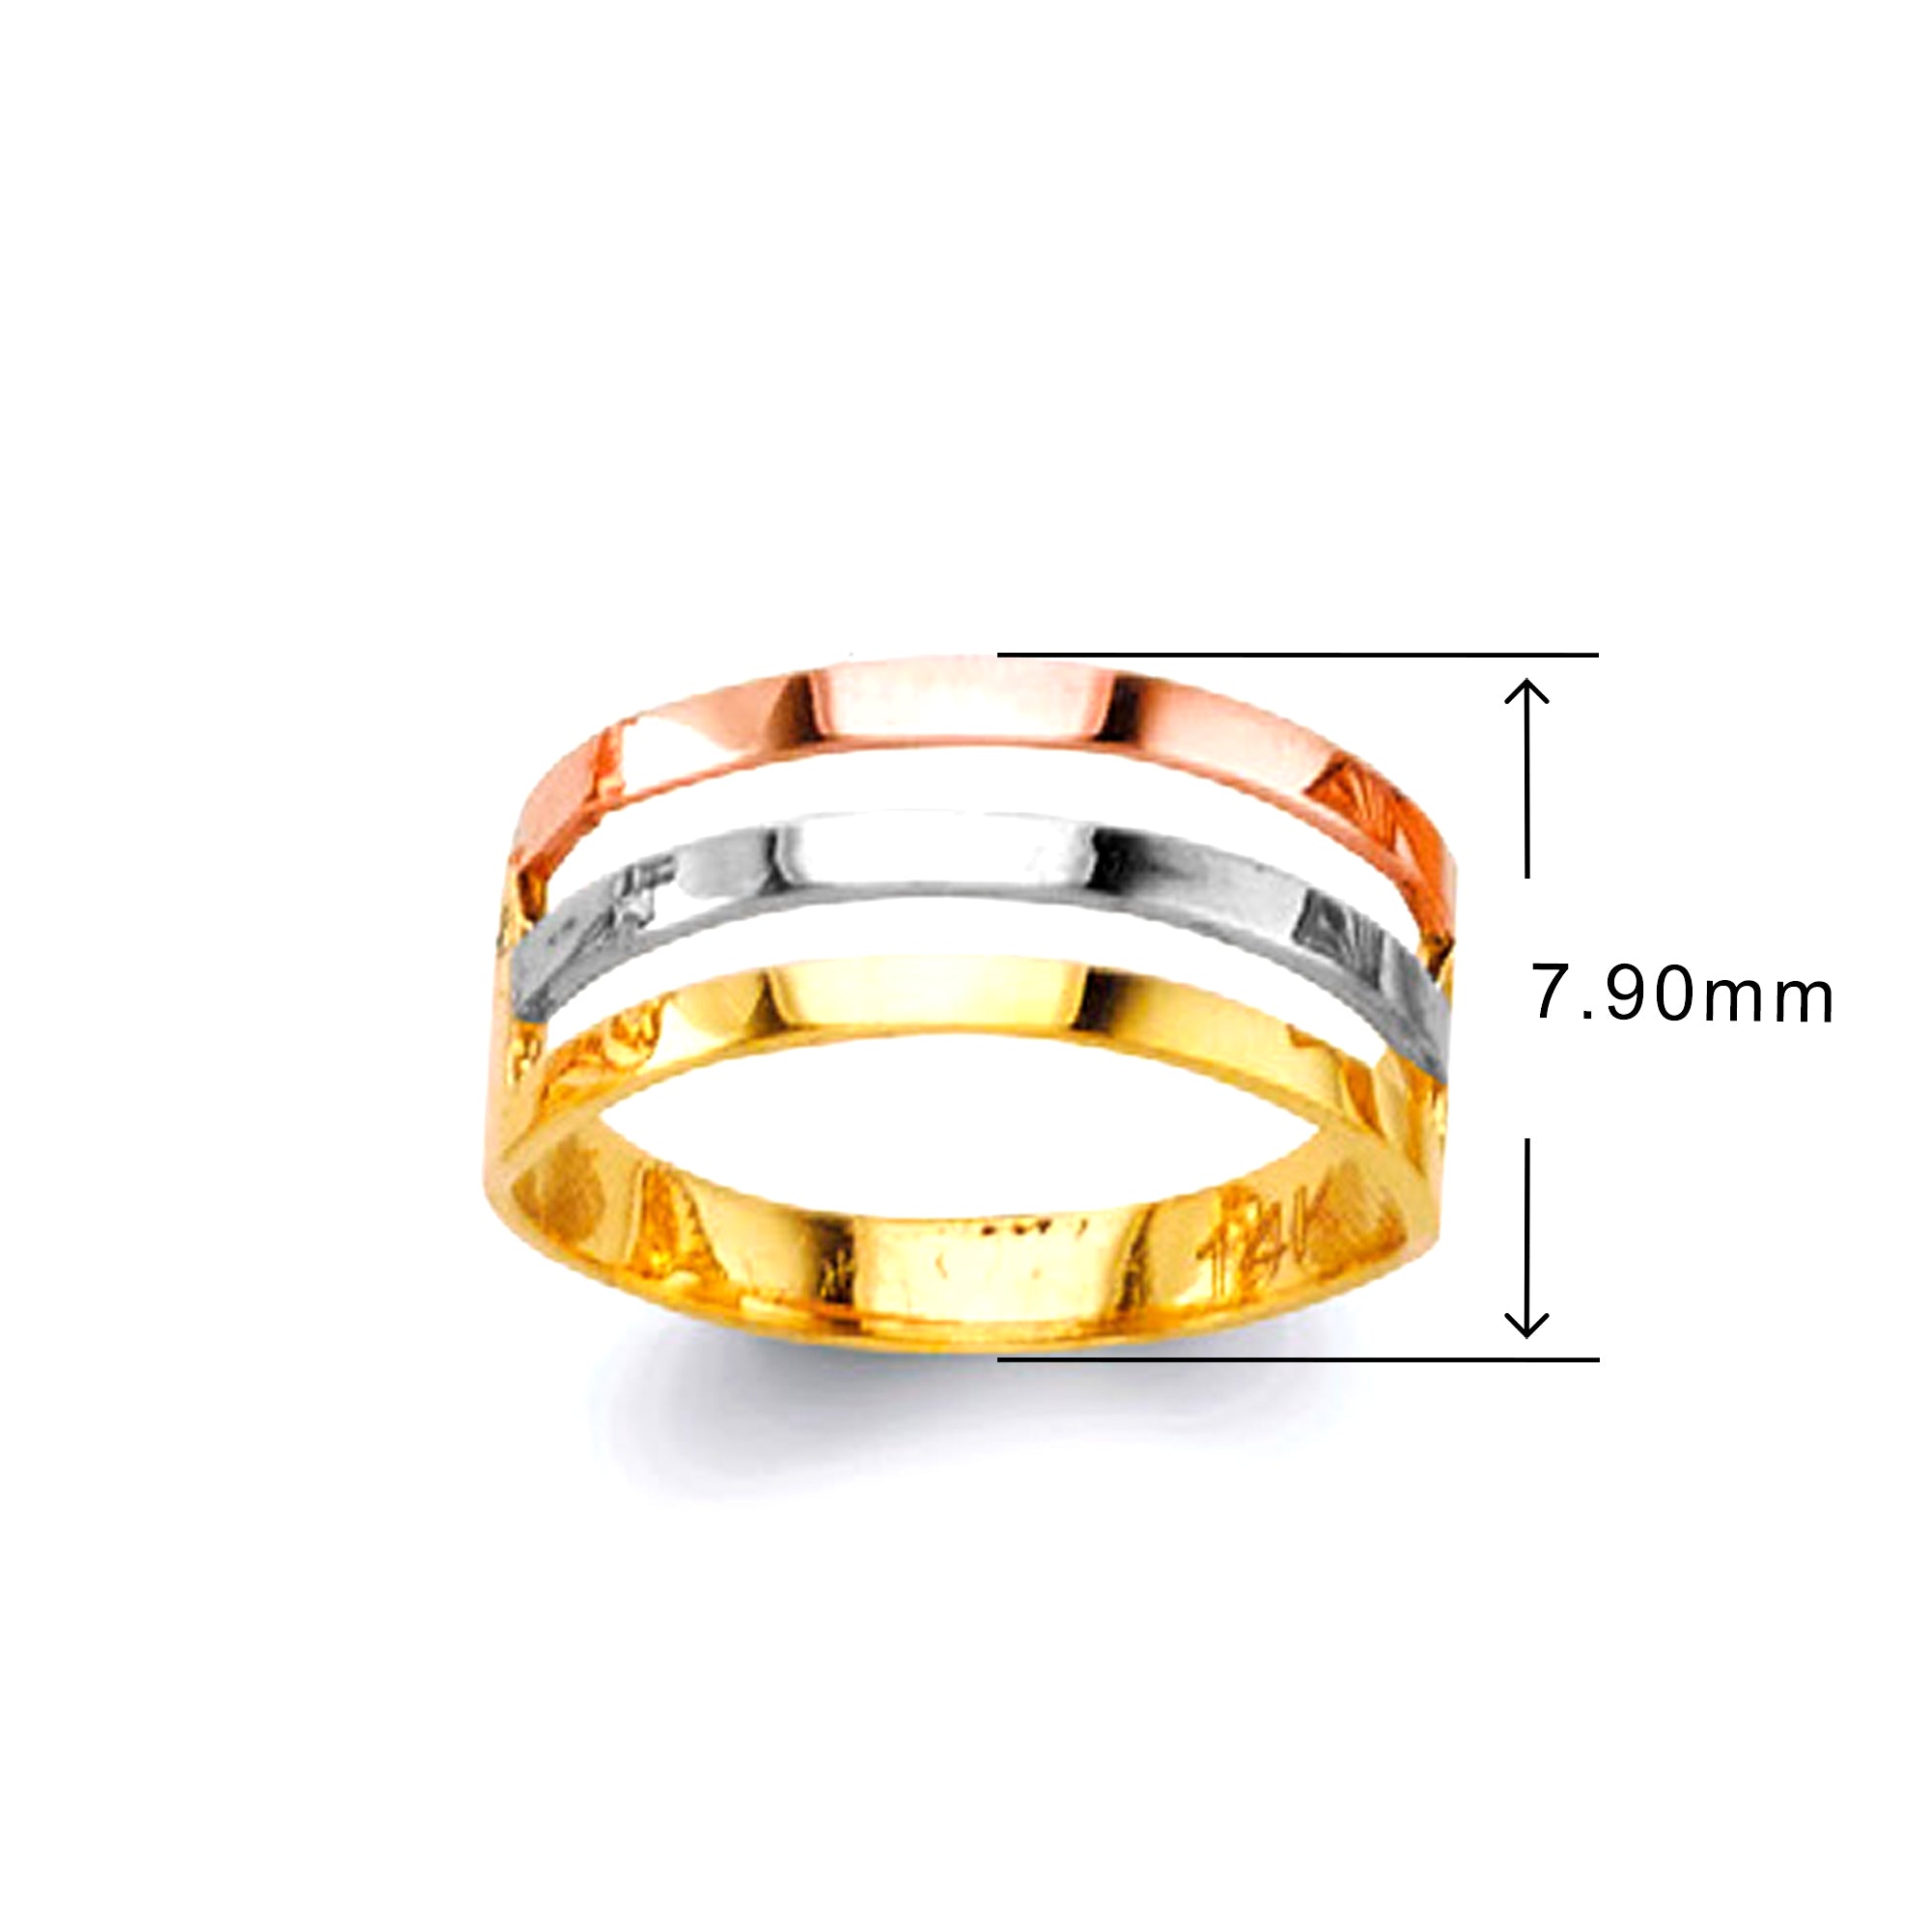 Fancy Tricolor Ring in Solid Gold with Measurement